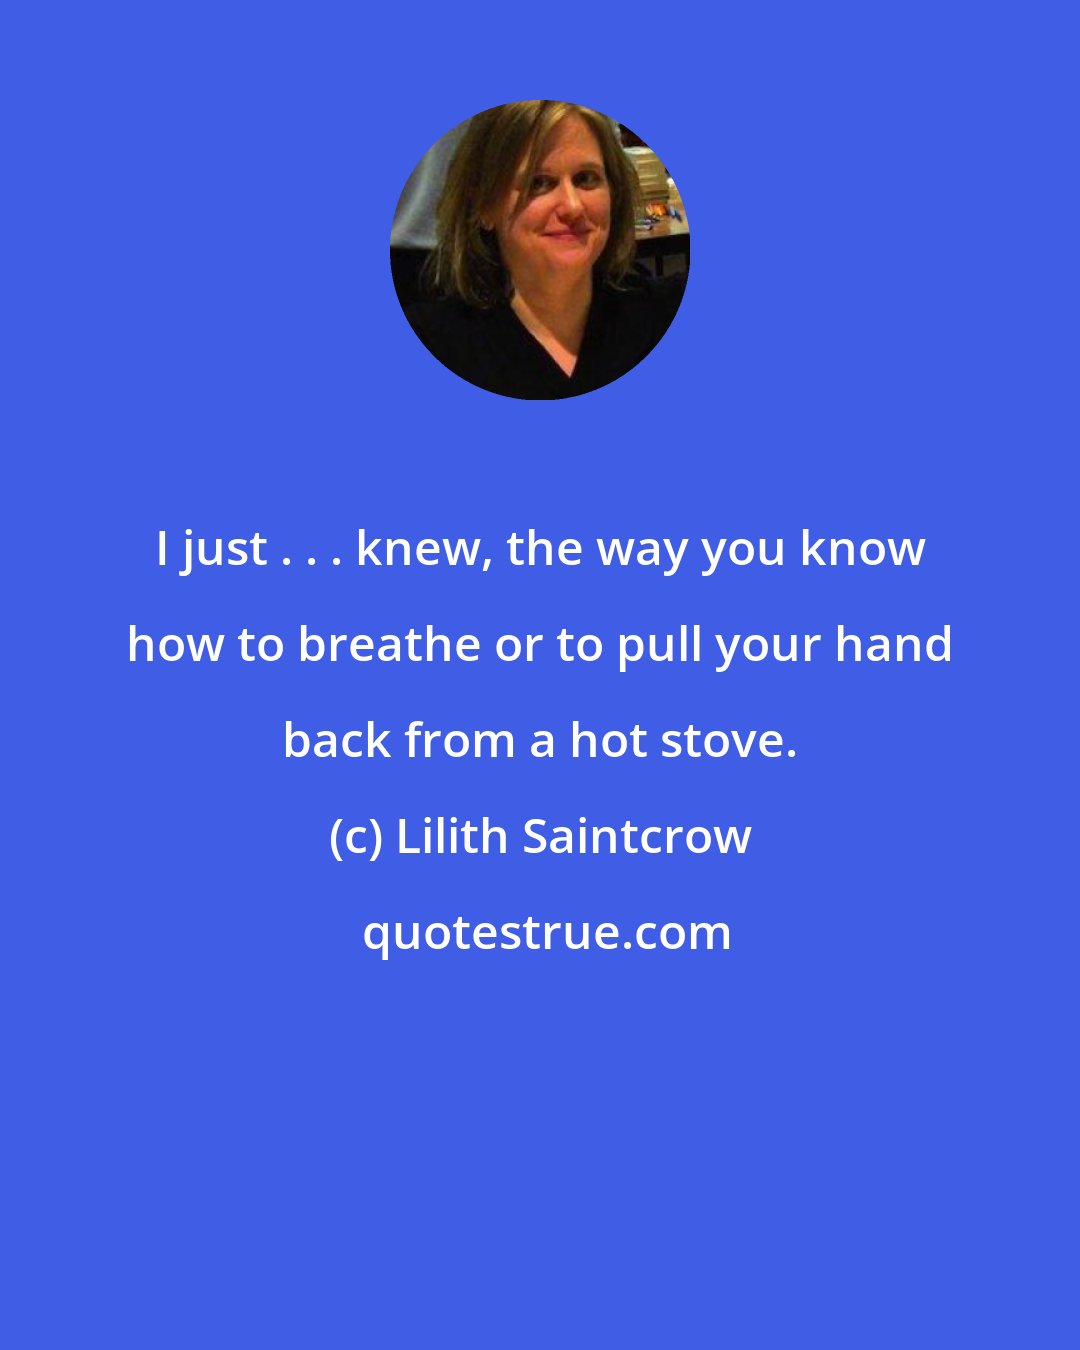 Lilith Saintcrow: I just . . . knew, the way you know how to breathe or to pull your hand back from a hot stove.